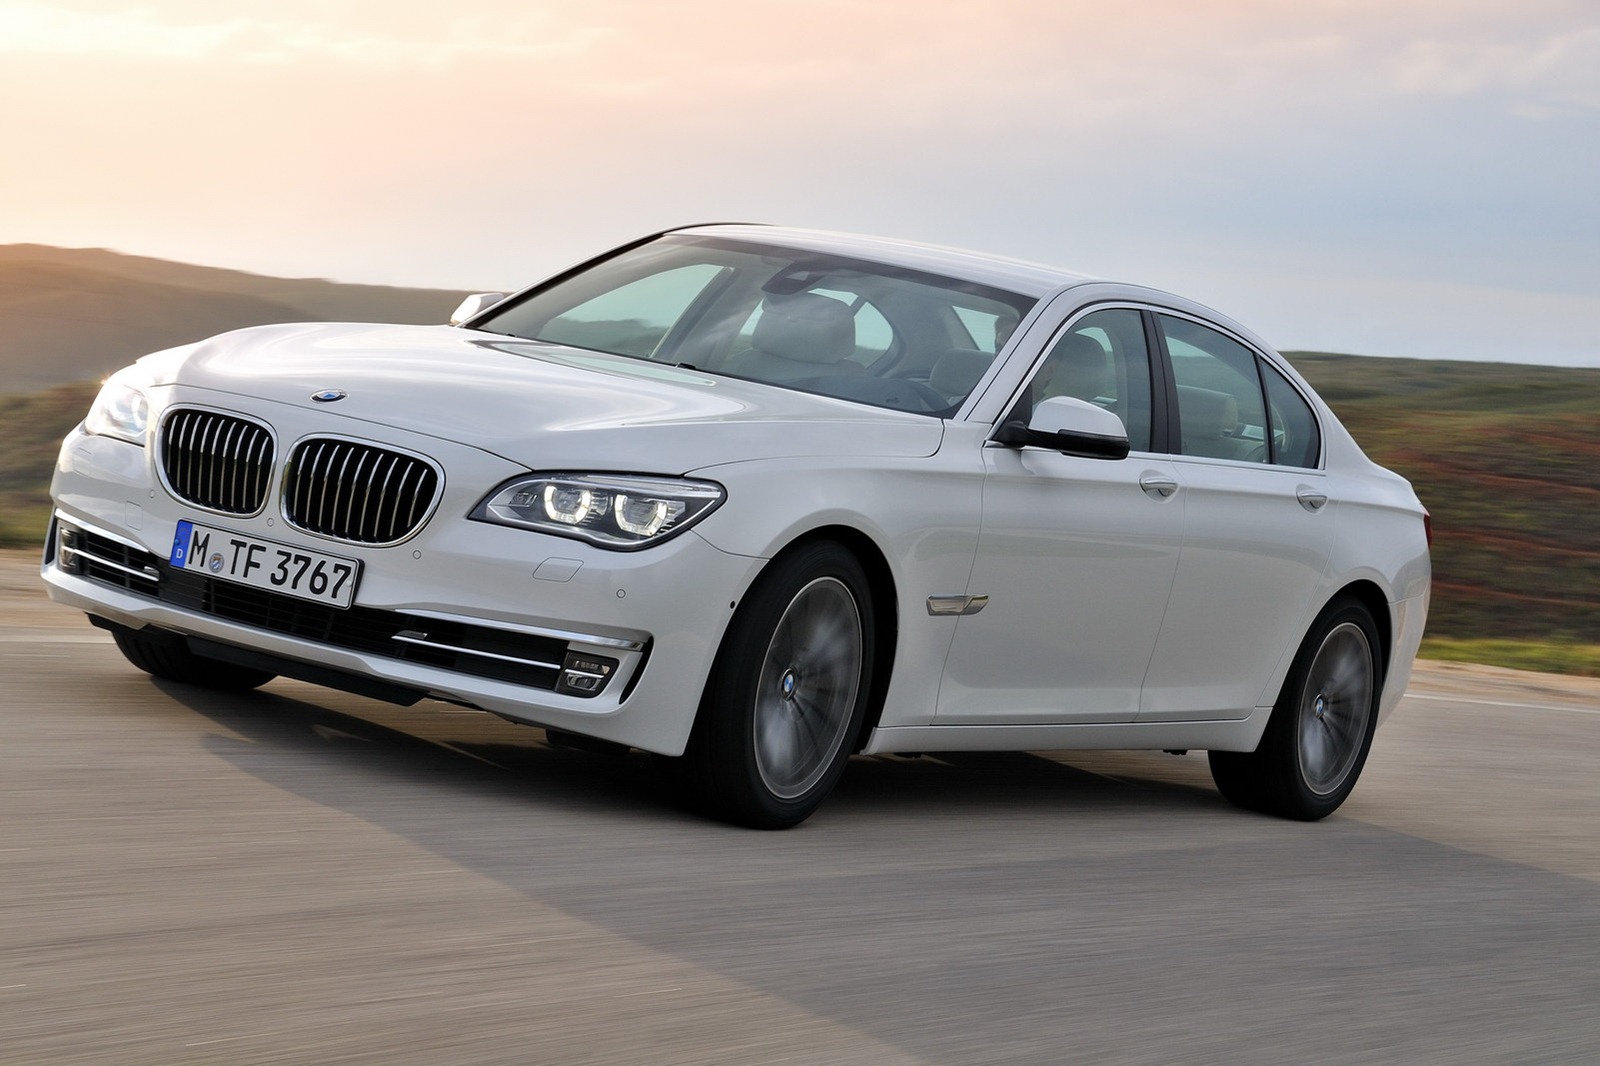 Facelifted F01 BMW 7 Series goes to Russia